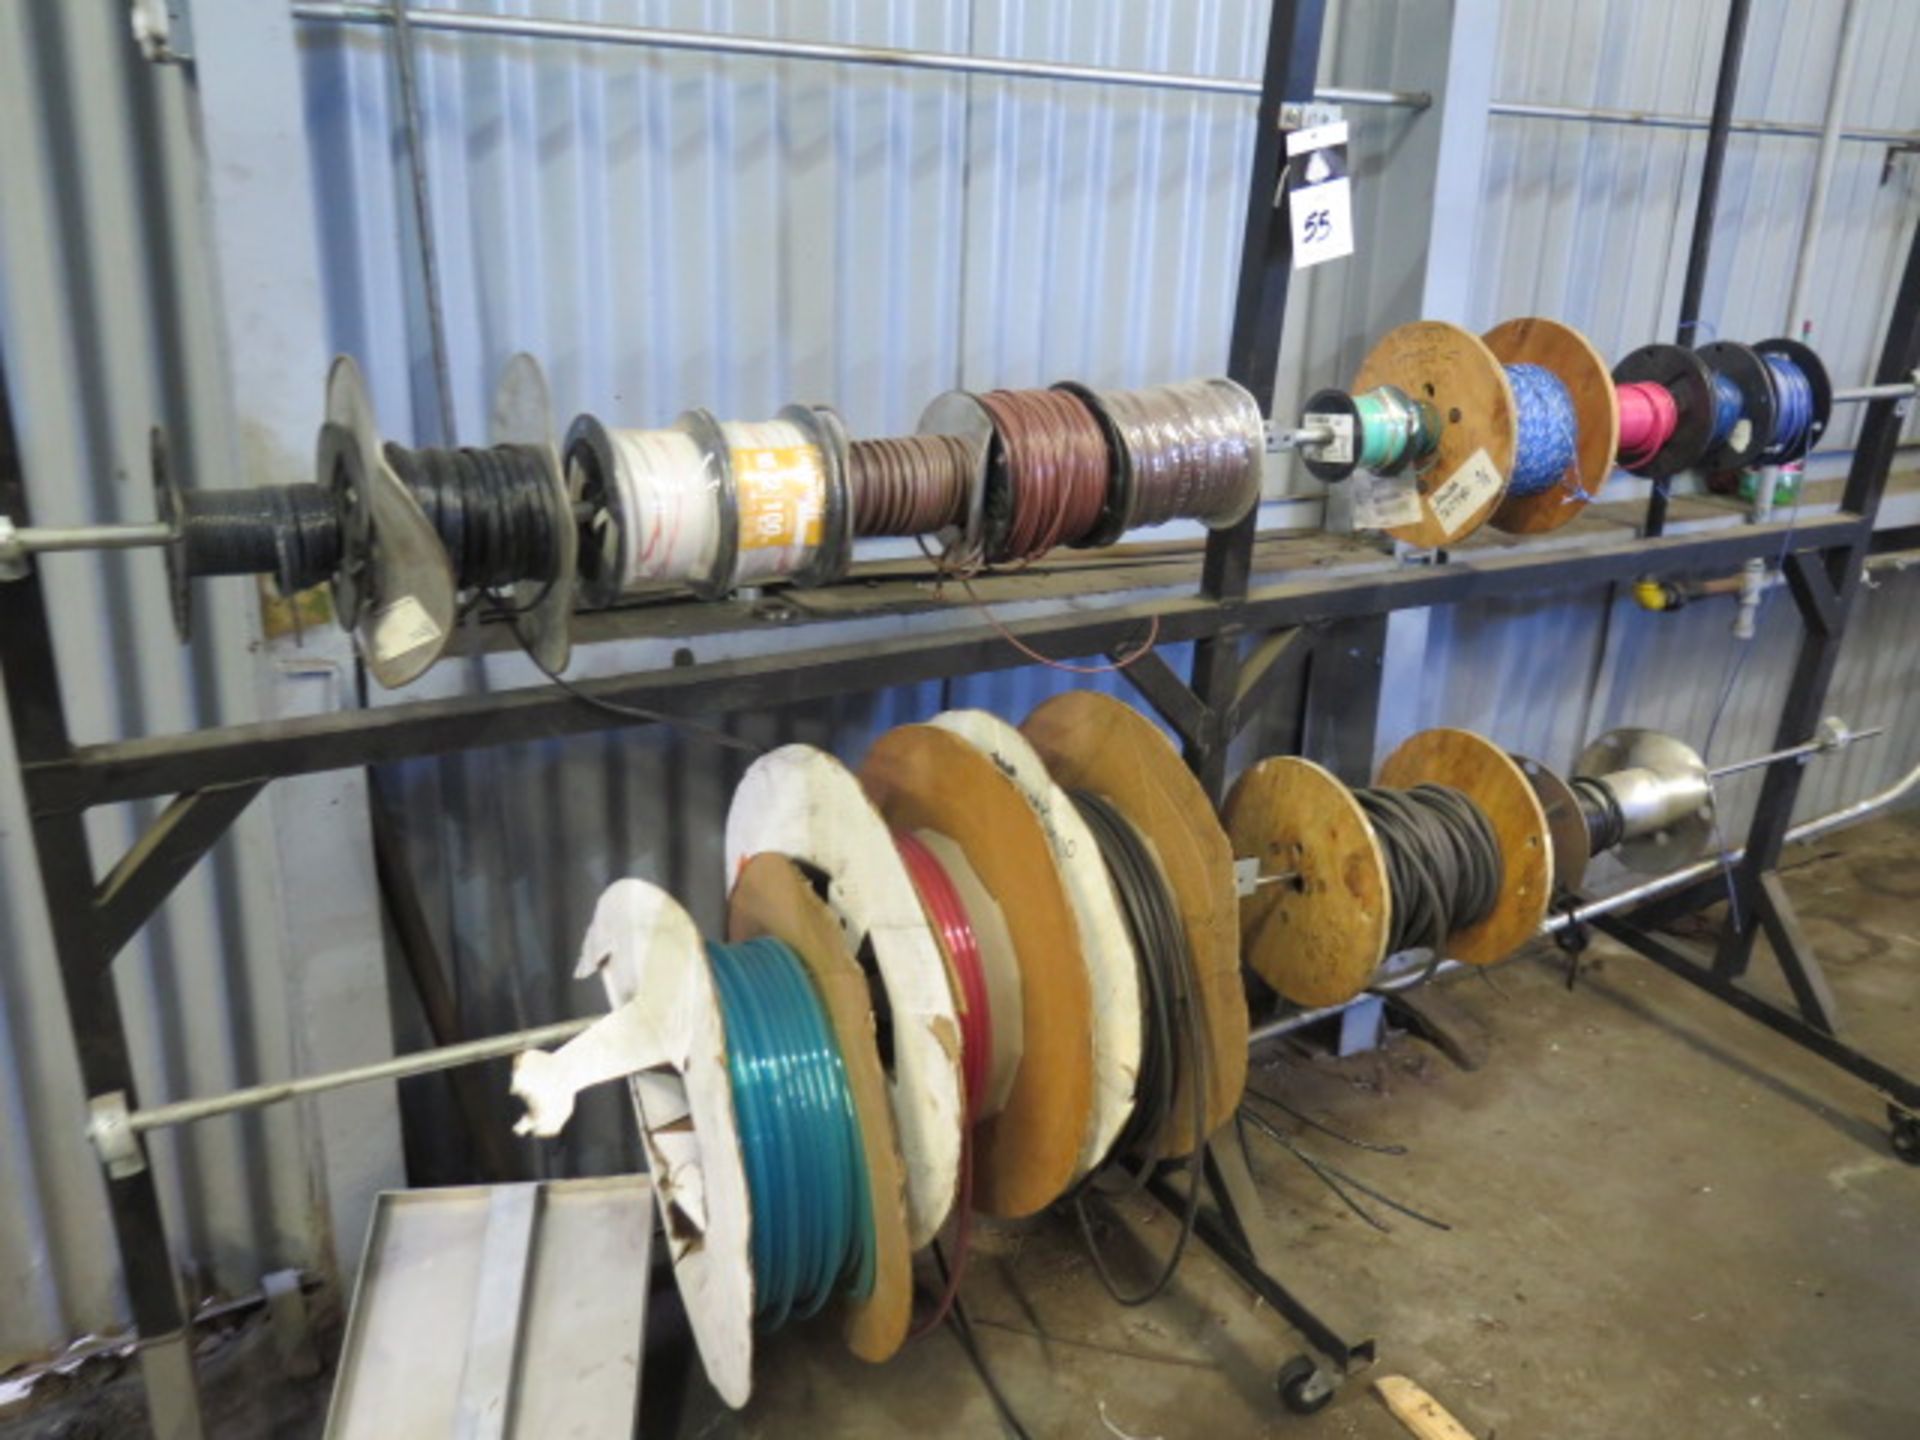 Rolling Wire Spool Racks (2) w/ Misc Electrical Wire and Tubing (SOLD AS-IS - NO WARRANTY) - Image 2 of 7